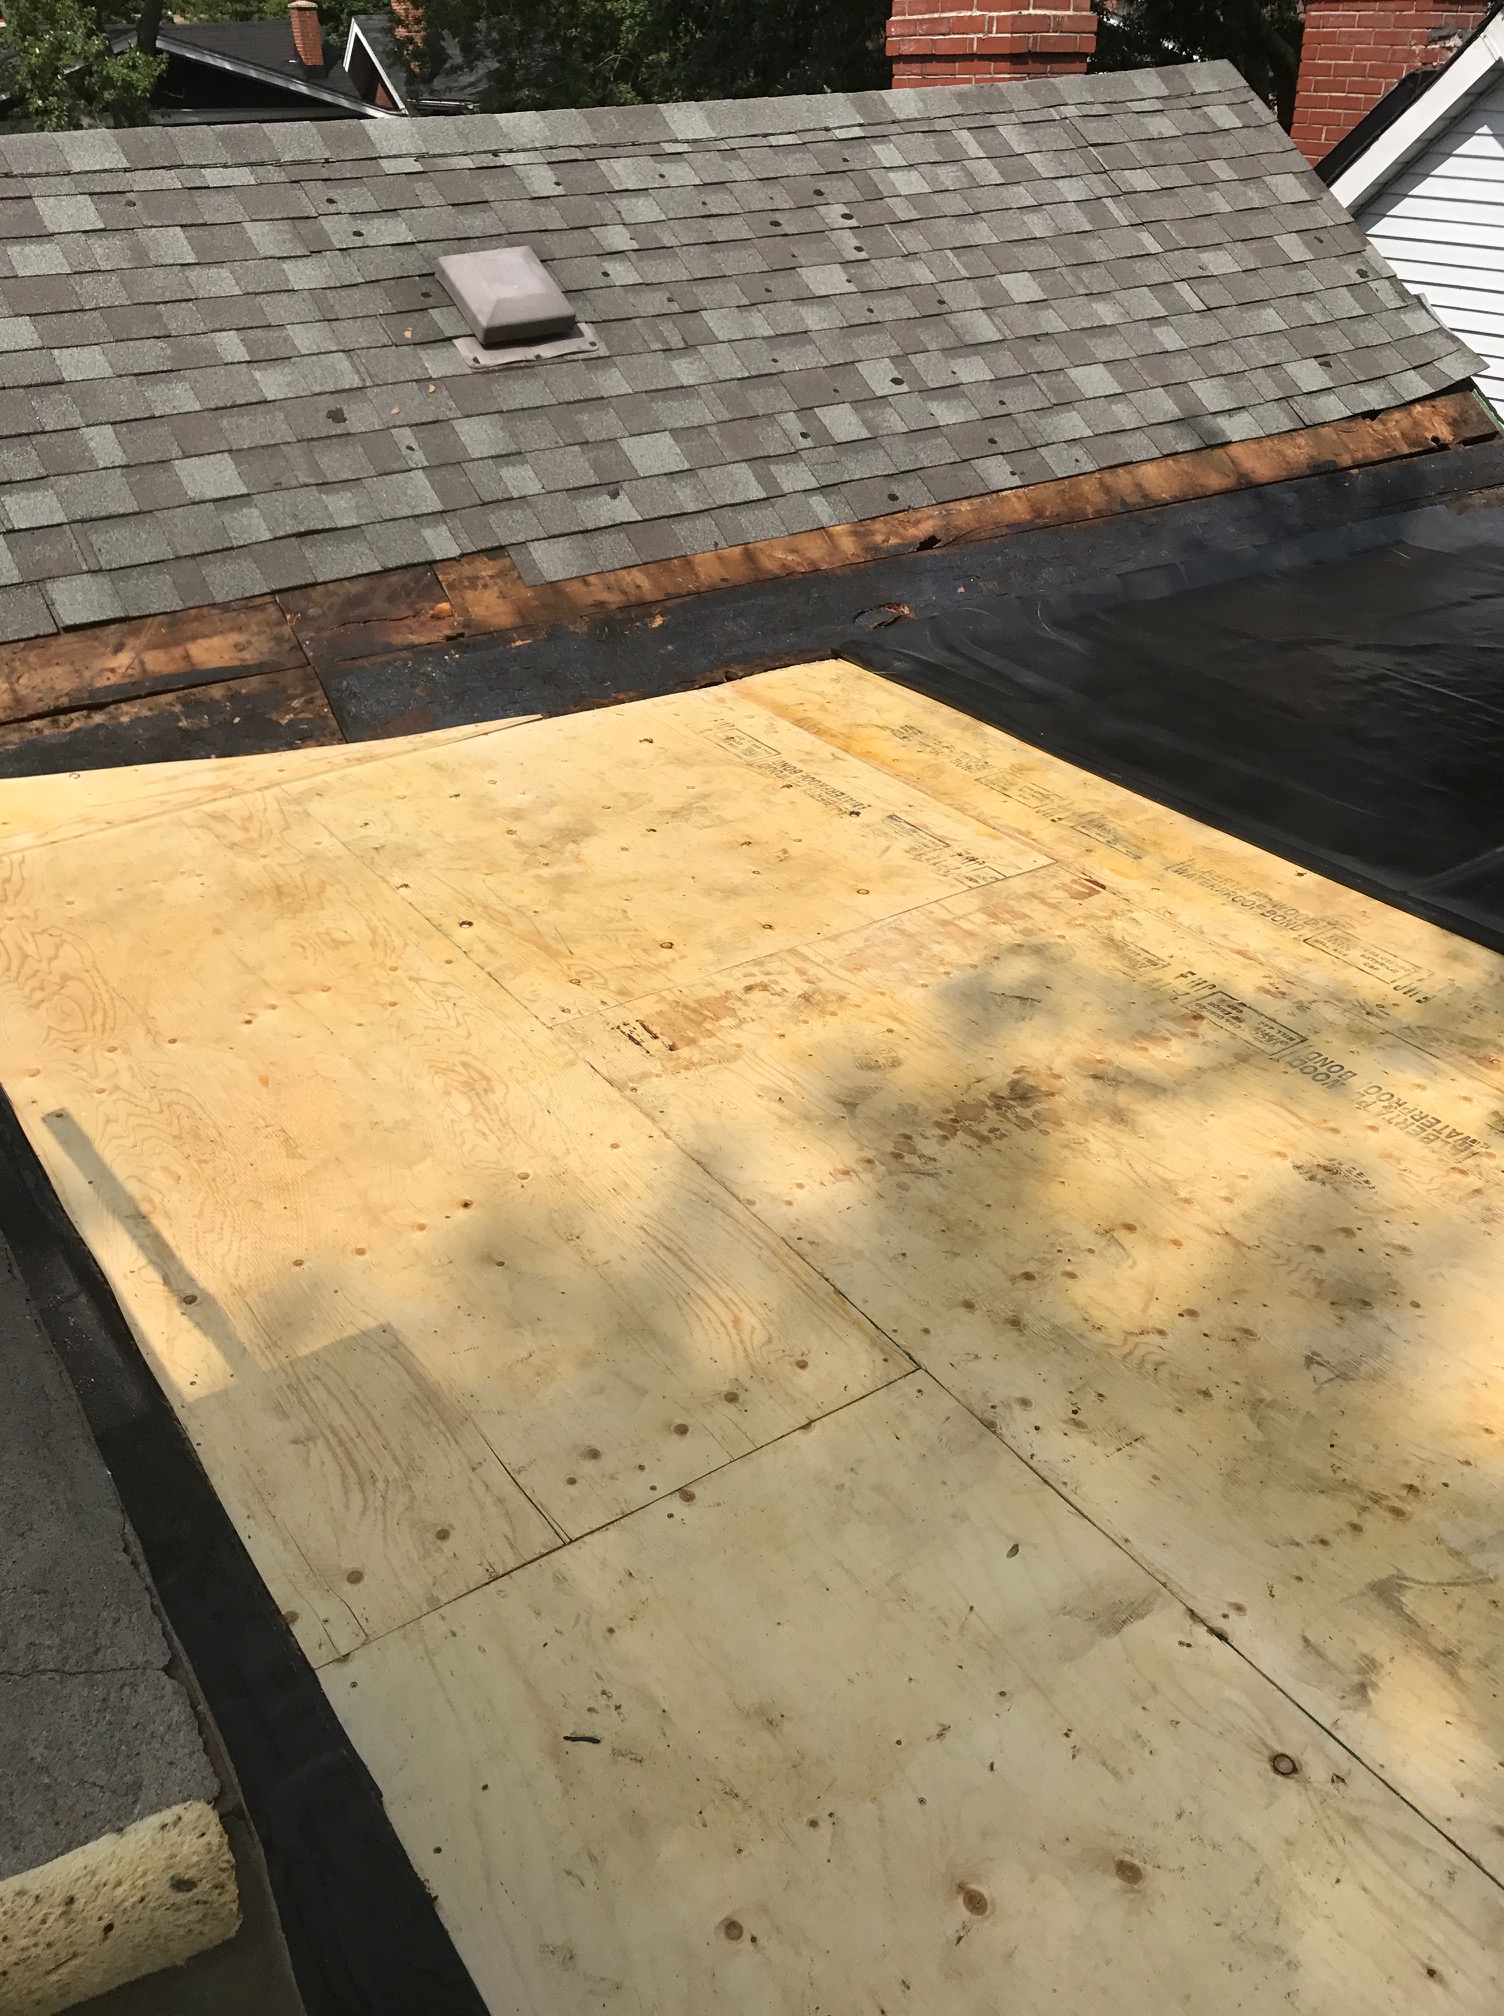 Fully adhered EPDM membrane on flat roof Toronto Roofing Repair Company Residential